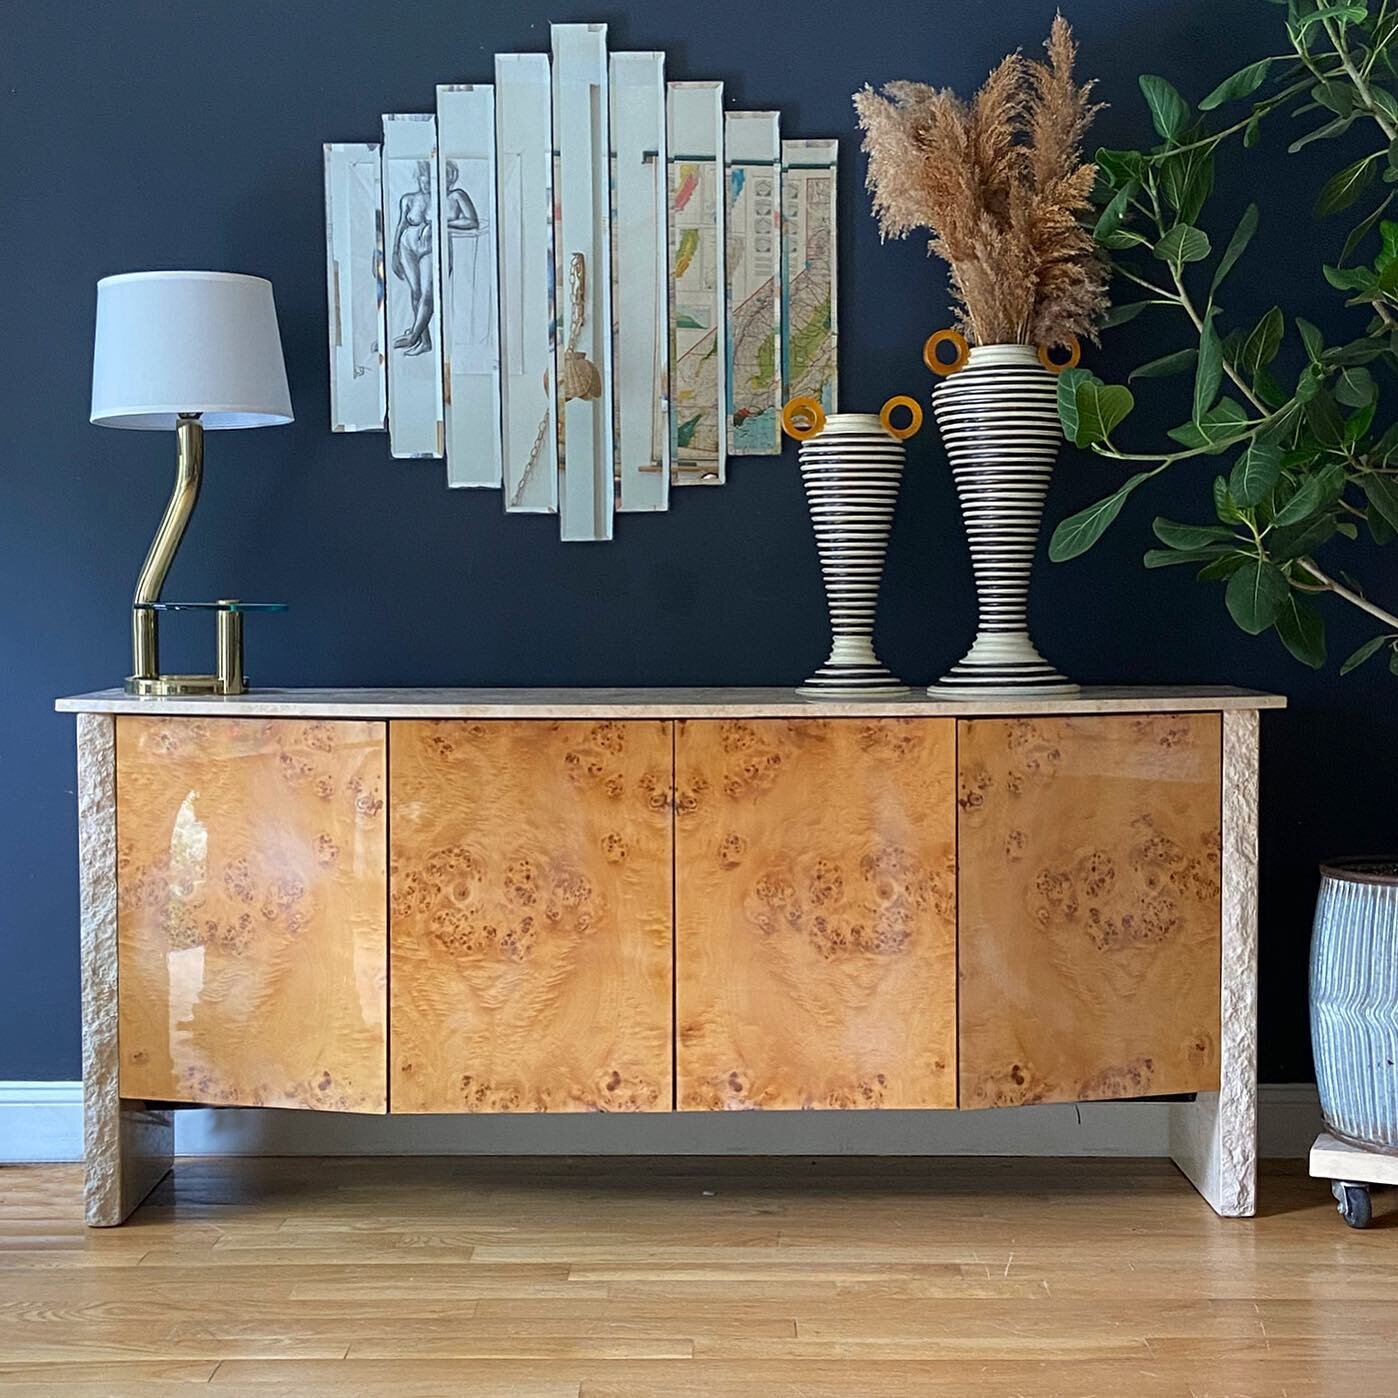 Some seriously sexy materials. Burl and travertine credenza $3200 79&rdquo; long x 22&rdquo; deep x 34&rdquo; tall

Paneled Mirror $325 36&rdquo; x 36&rdquo;
Vases SOLD
Brass &amp; Glass Table Lamp $245